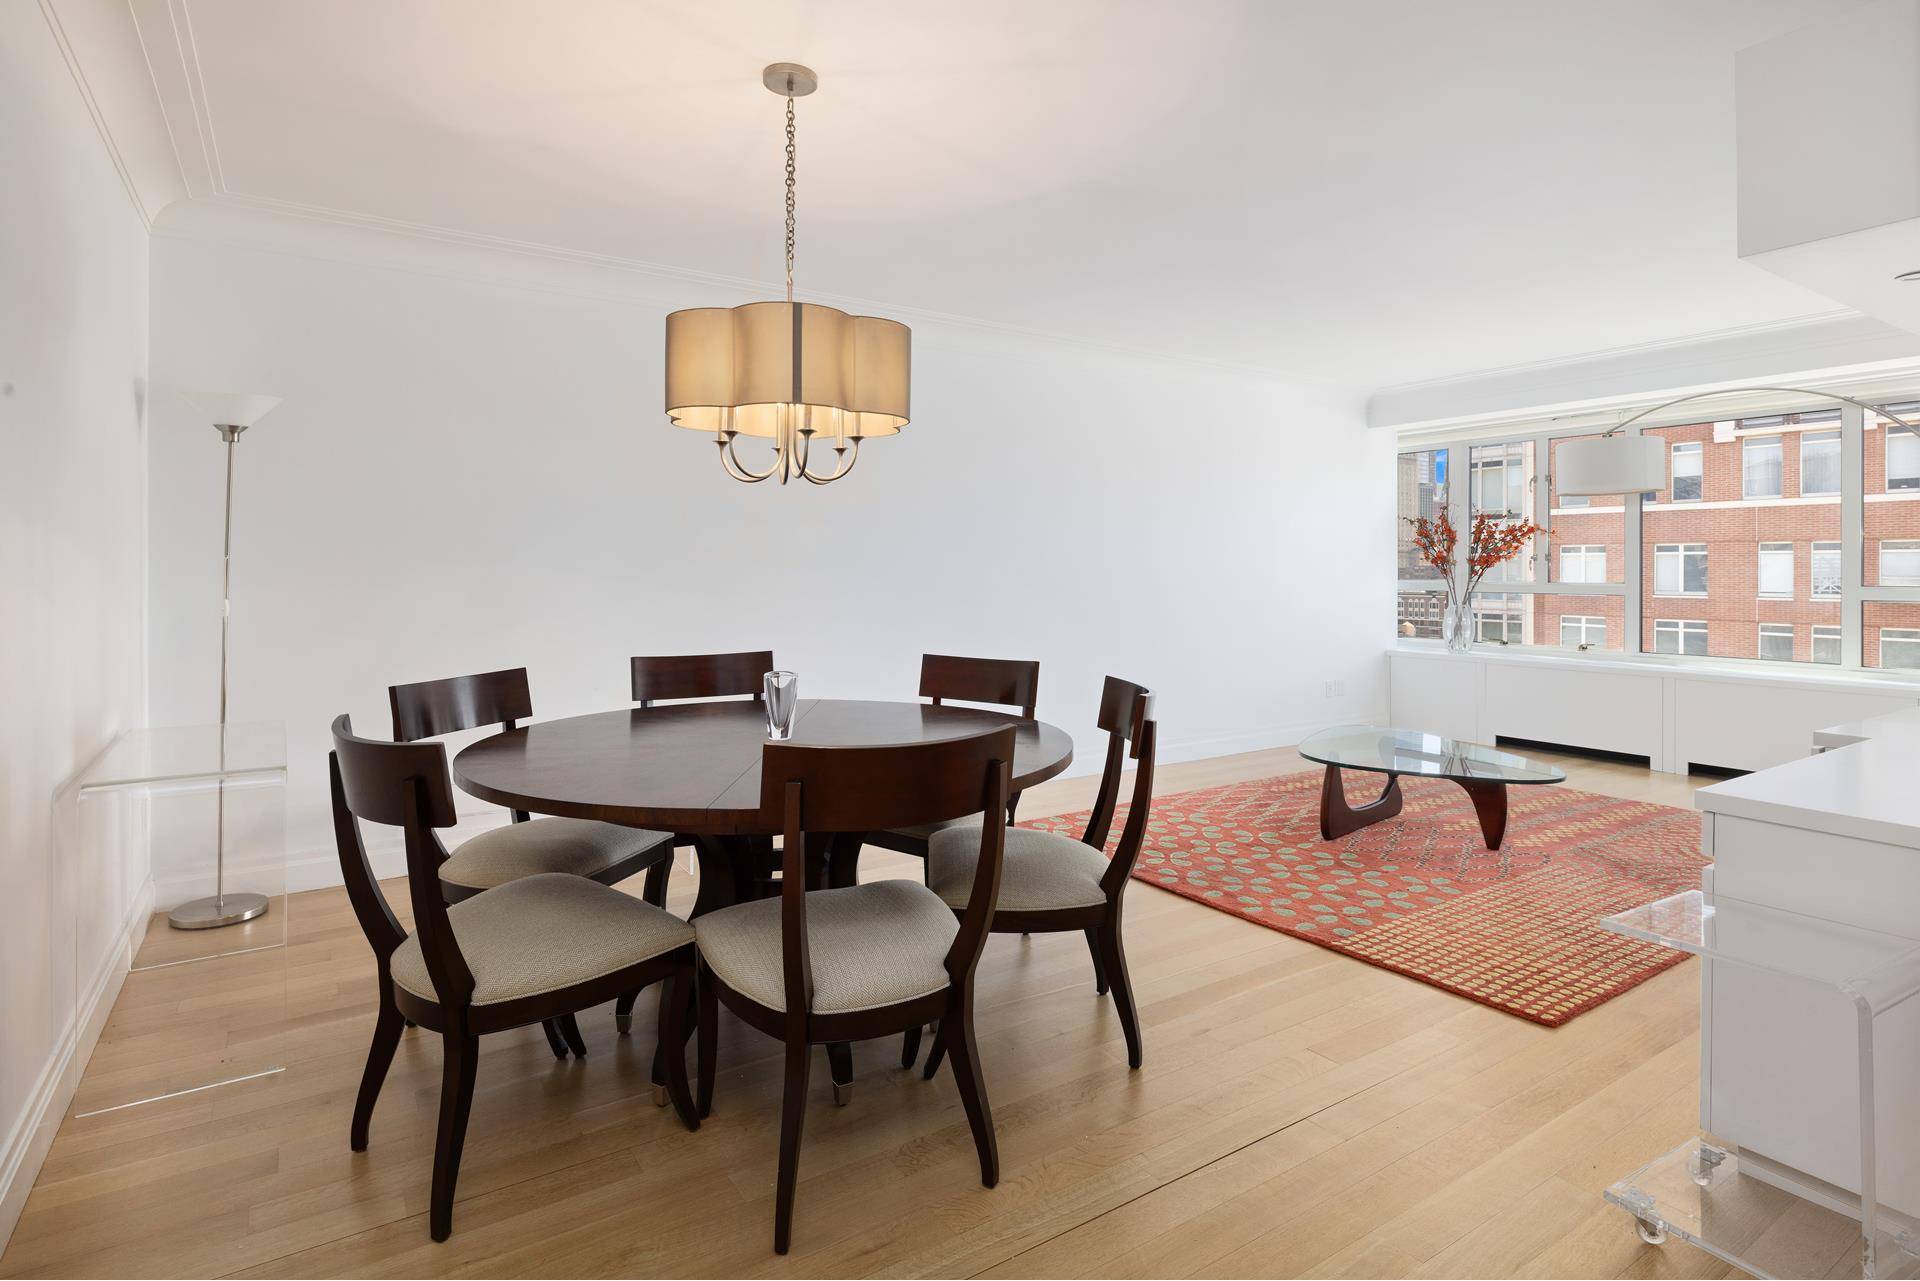 SUNLIT ONE BEDROOM IN LANDMARKED HEART OF UPPER EAST SIDEThis one bedroom gem is perched on a high floor of the iconic Manhattan House and receives beautiful light all day.